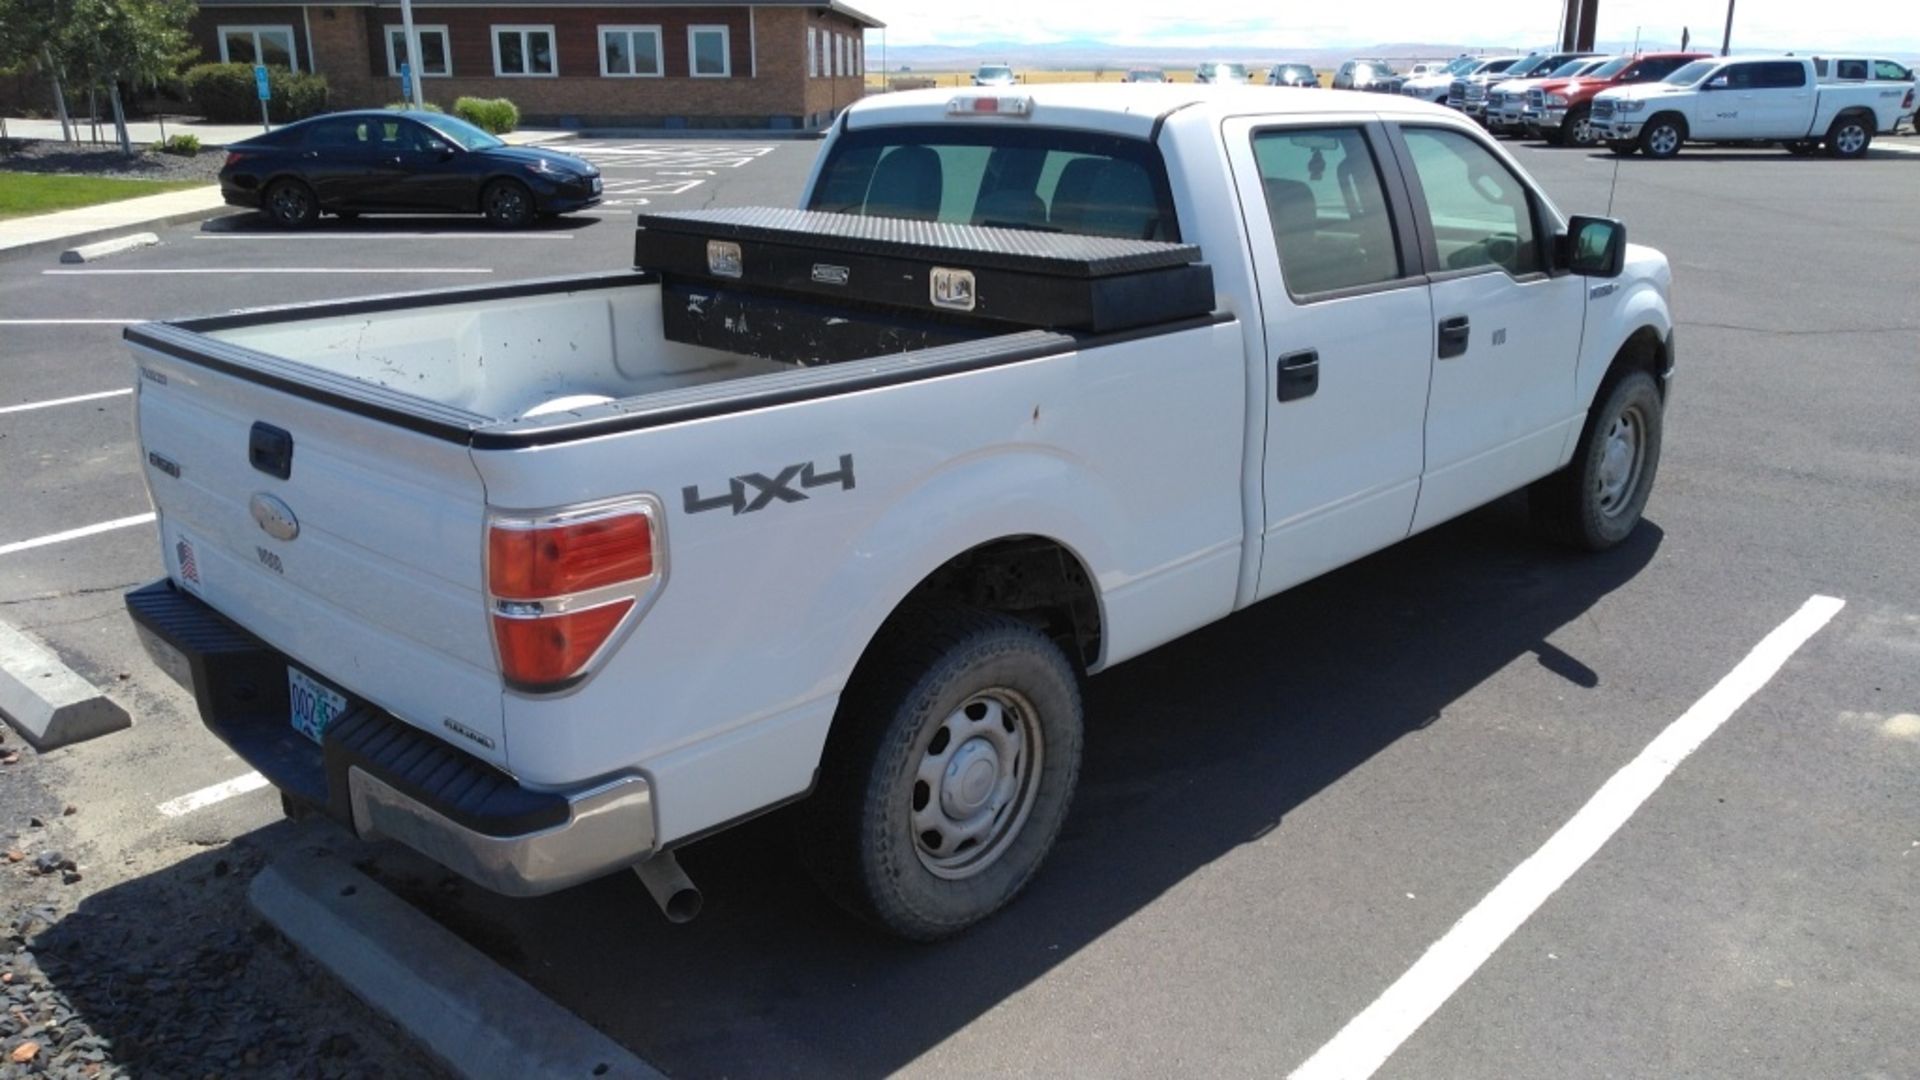 2011 Ford F150 XL 4x4 Crew Cab Pickup - Image 5 of 22